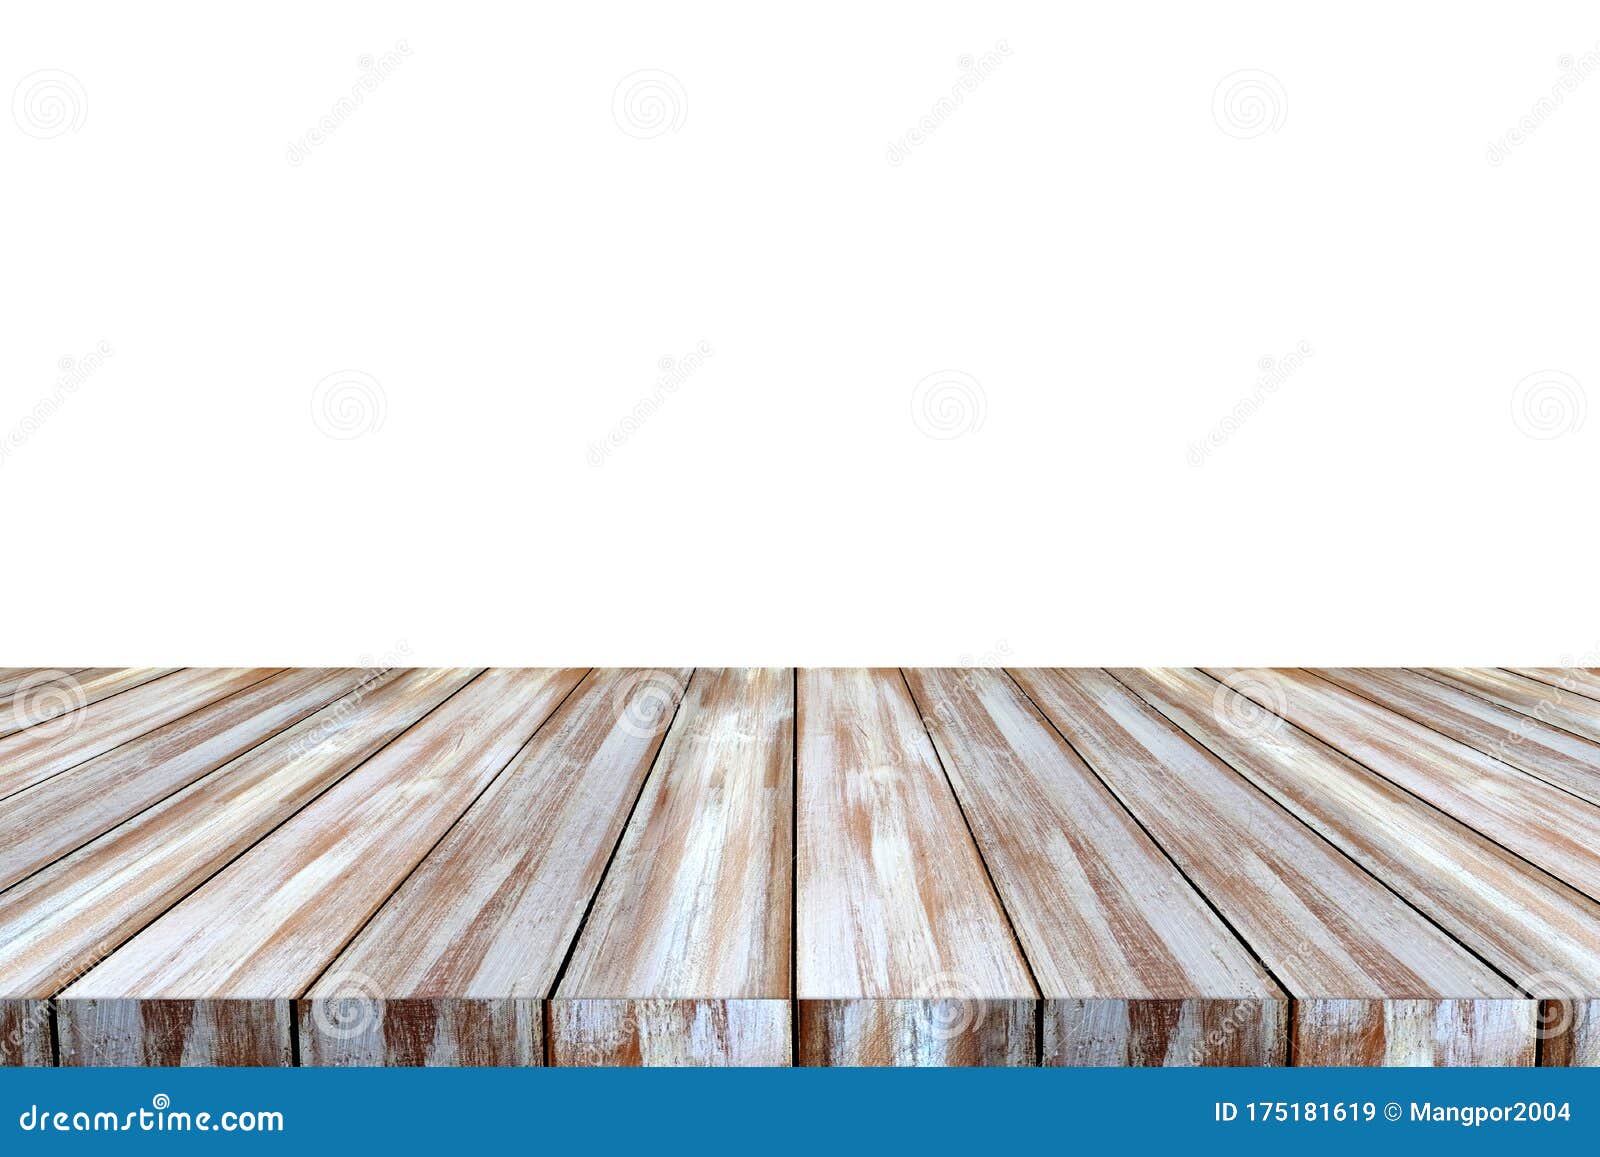 Perspective Wooden Table Top Desk Isolated On White Background Wood Table Surface For Product Display Background Empty Wooden Stock Image Image Of Blank Perspective